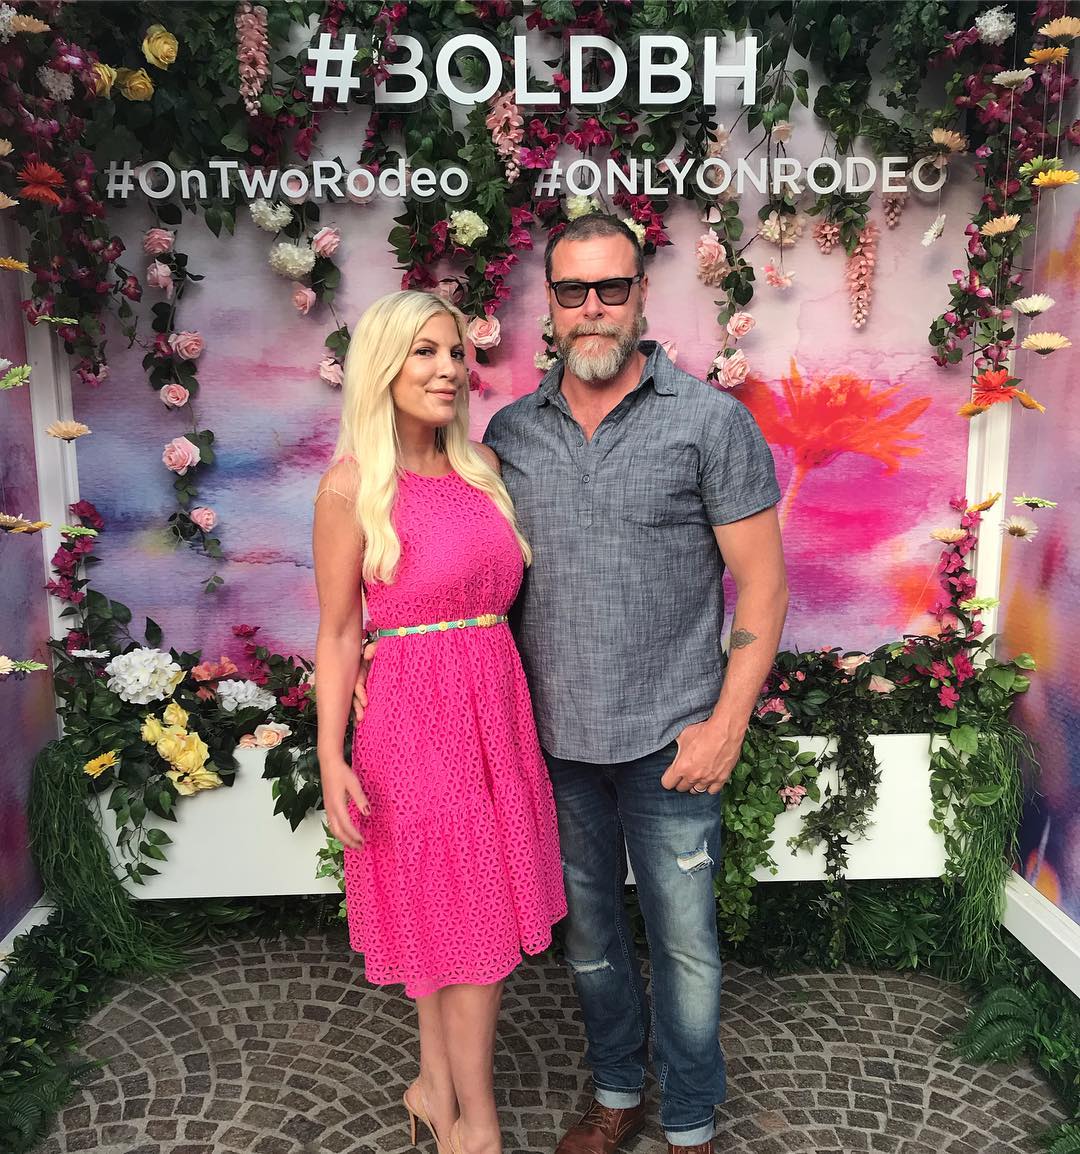 Photo shared by Dean McDermott on August 16 2018 tagging @torispelling @imdeanmcdermott @iamdawnmccoy @louisvuitton and @lafoodwine